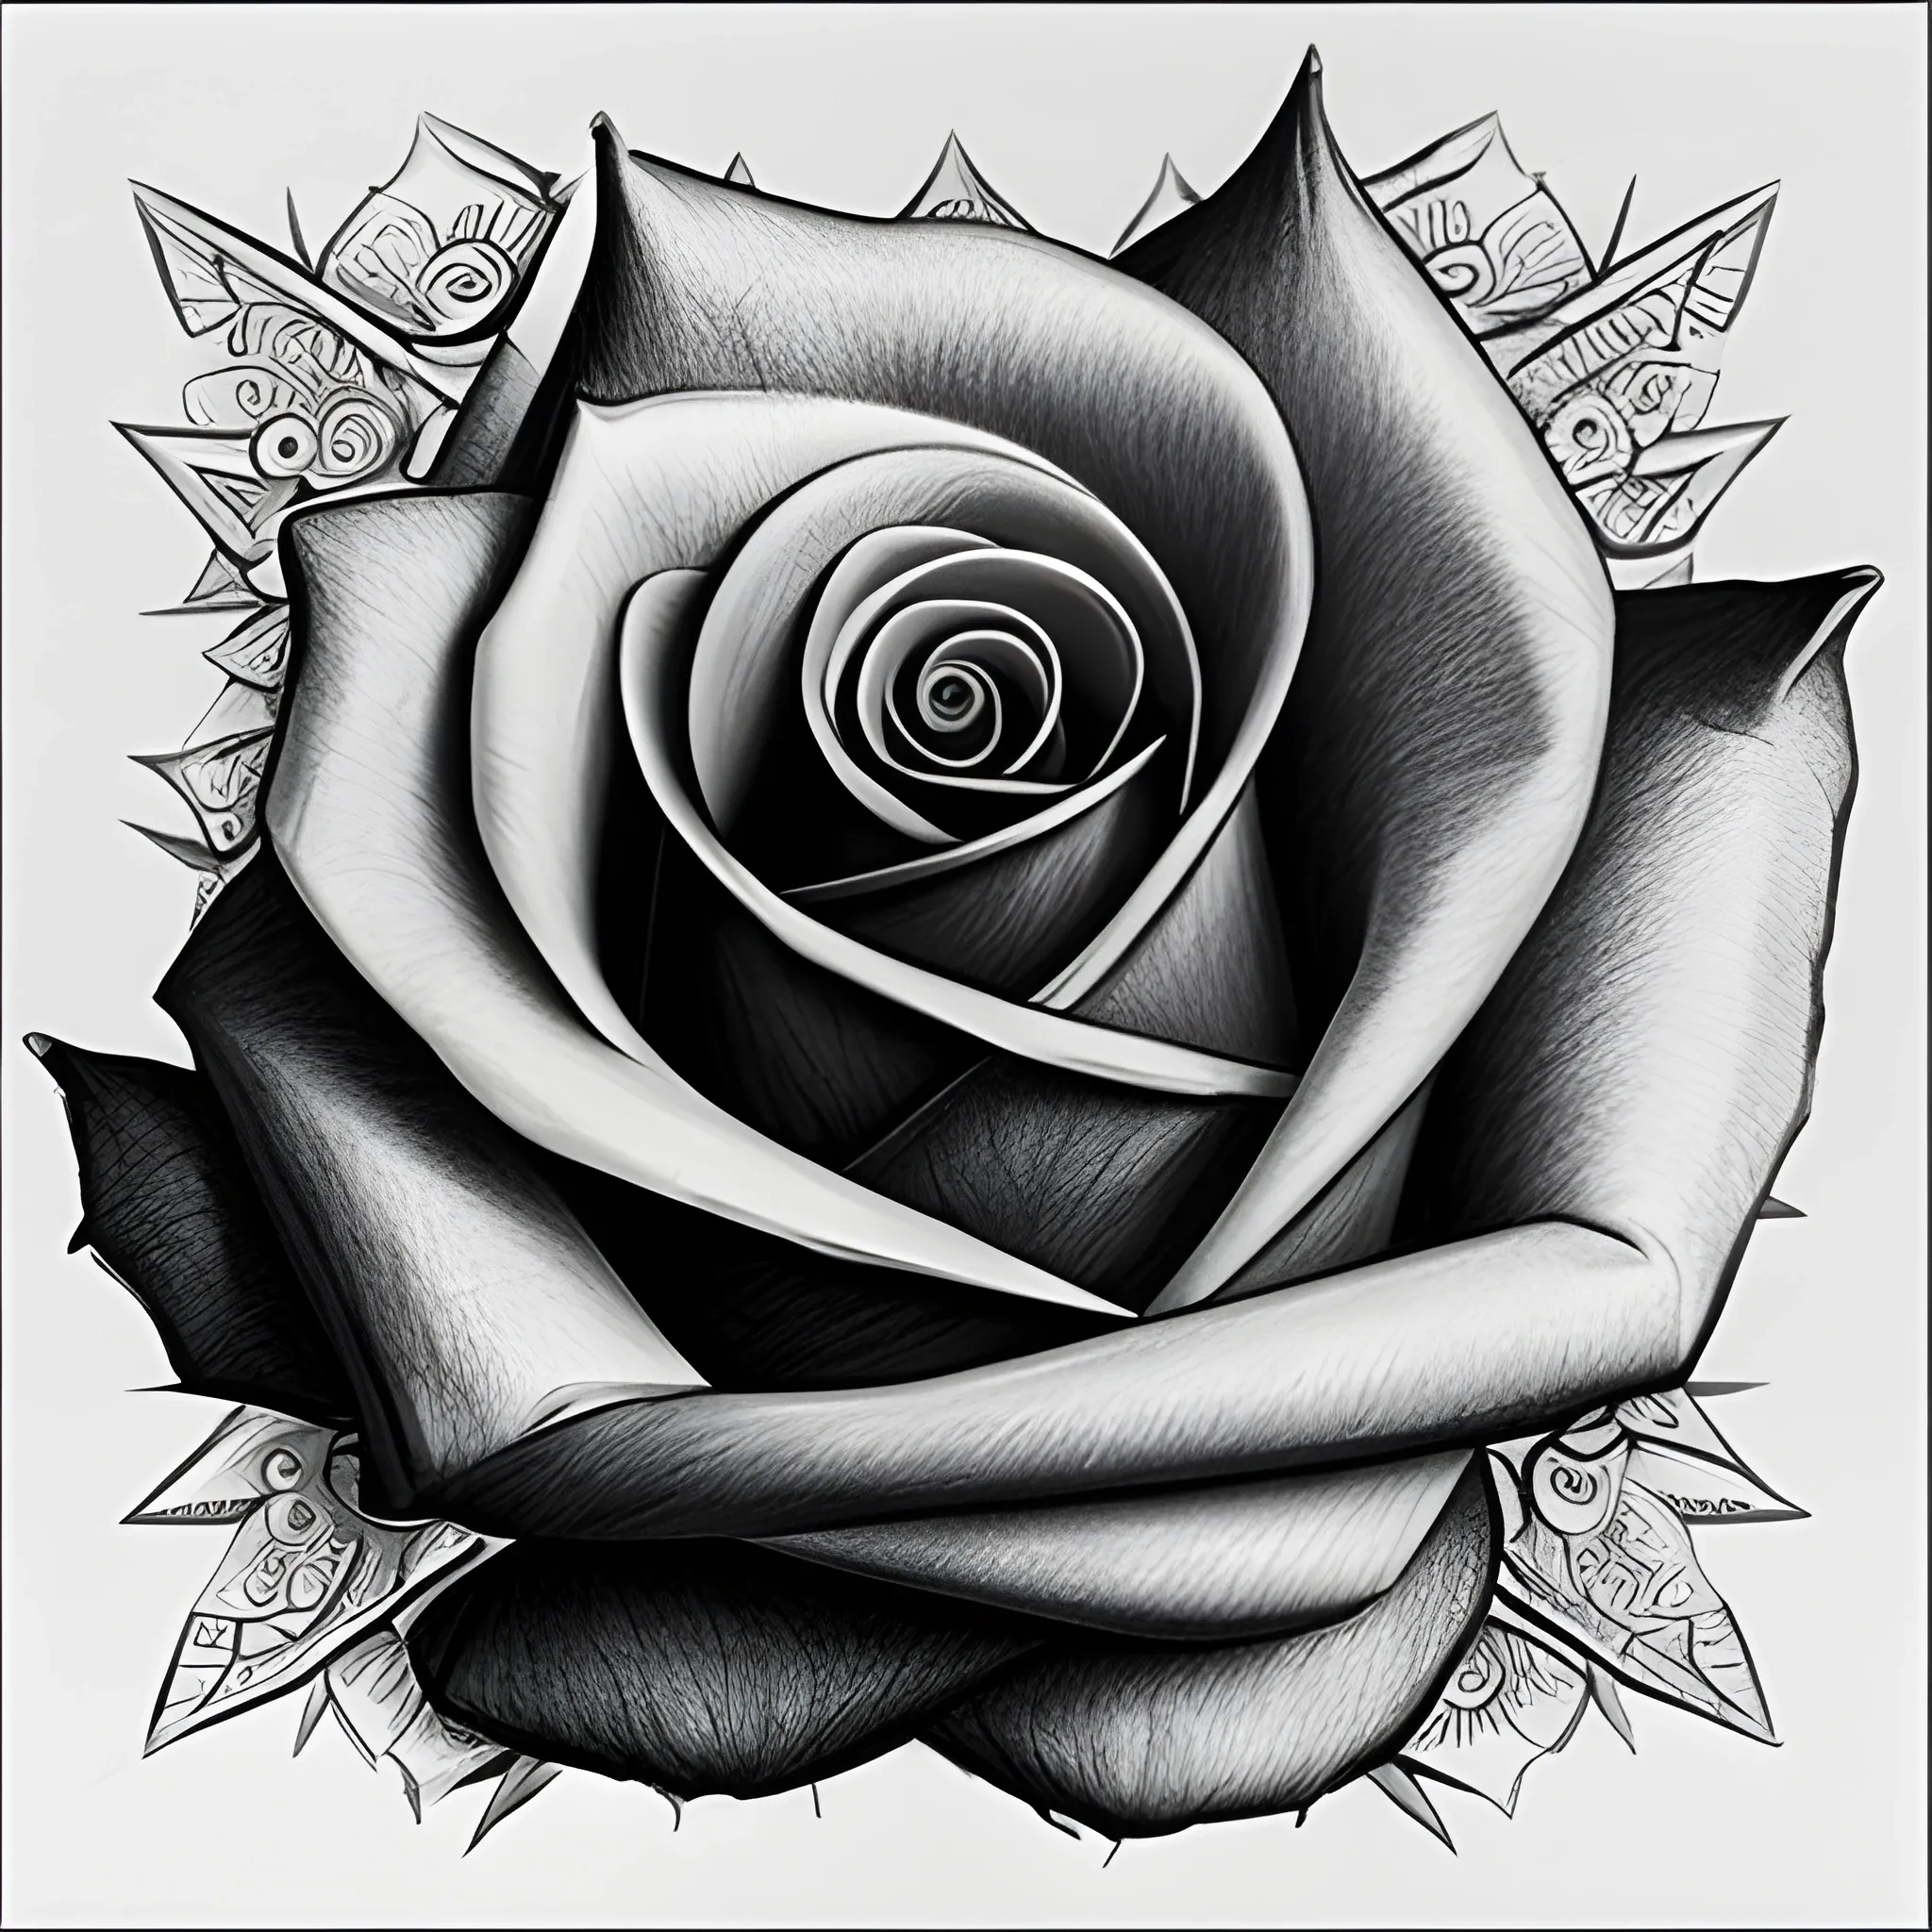 Geanny Tattoo - Poker cards and Rose- By Coltea  https://www.instagram.com/geannytattoo Cremuţă - Tattoo aftercare  #tattoopeople #tattooshop #tattooink #tattooist #tattoosibiu #geannytattoo  #lifemoments #memory #inkaddicts #love #art #inkmaster ...